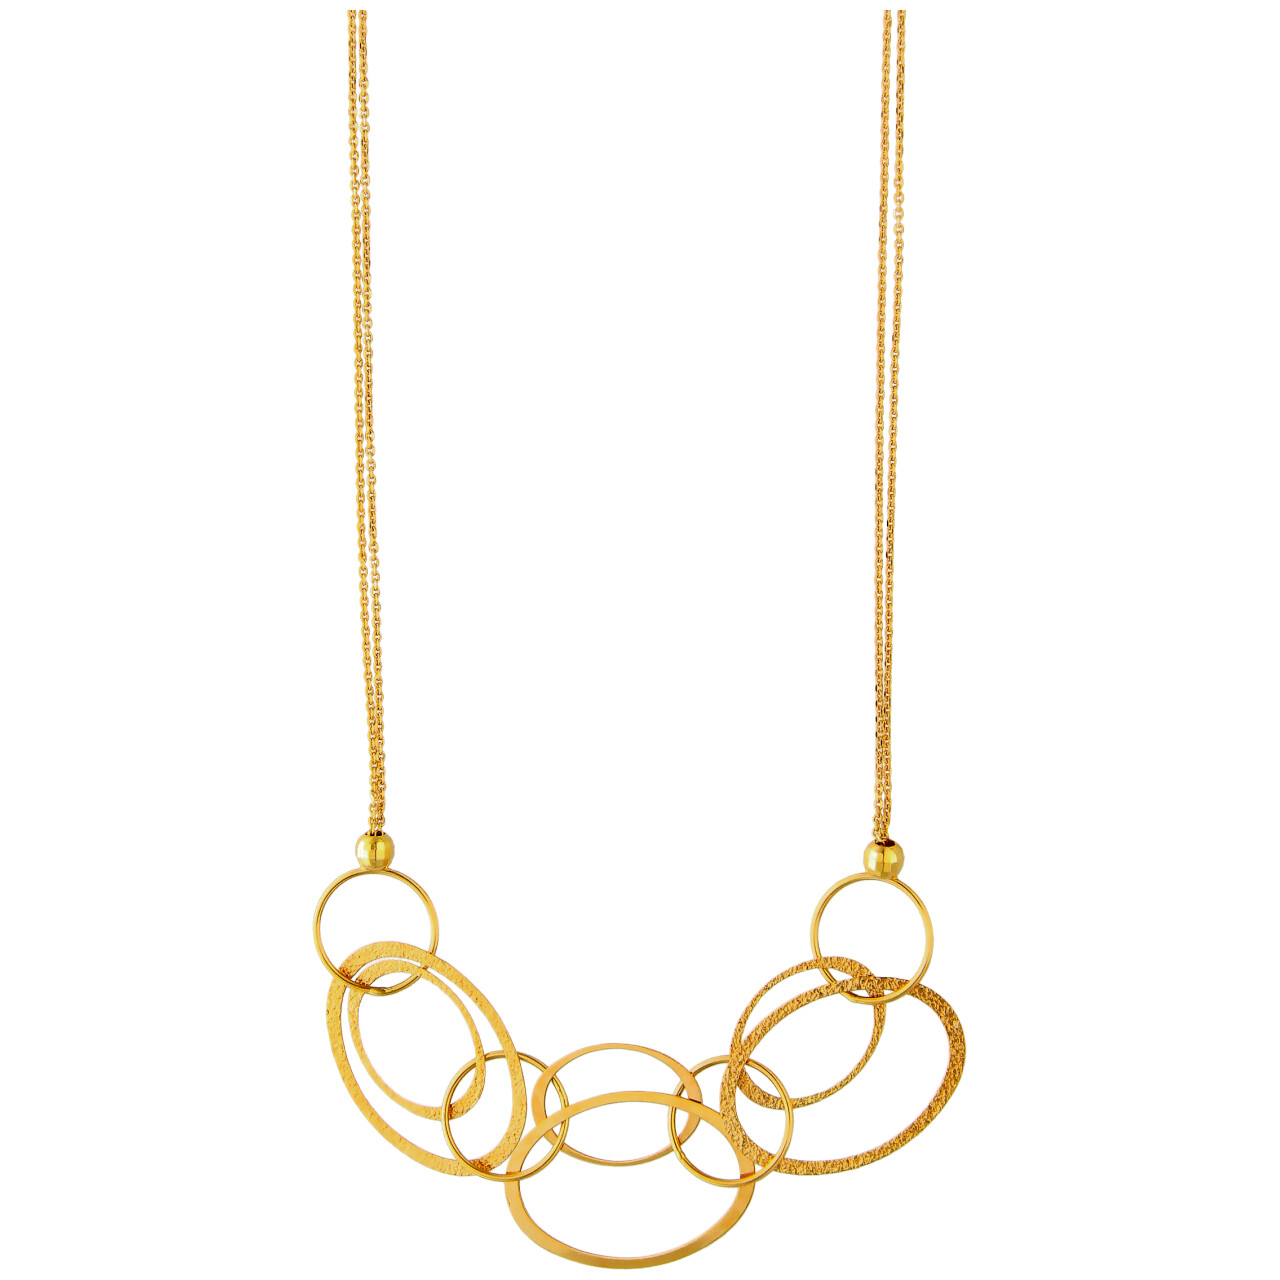 Fantasy Circle Necklace in Yellow Gold